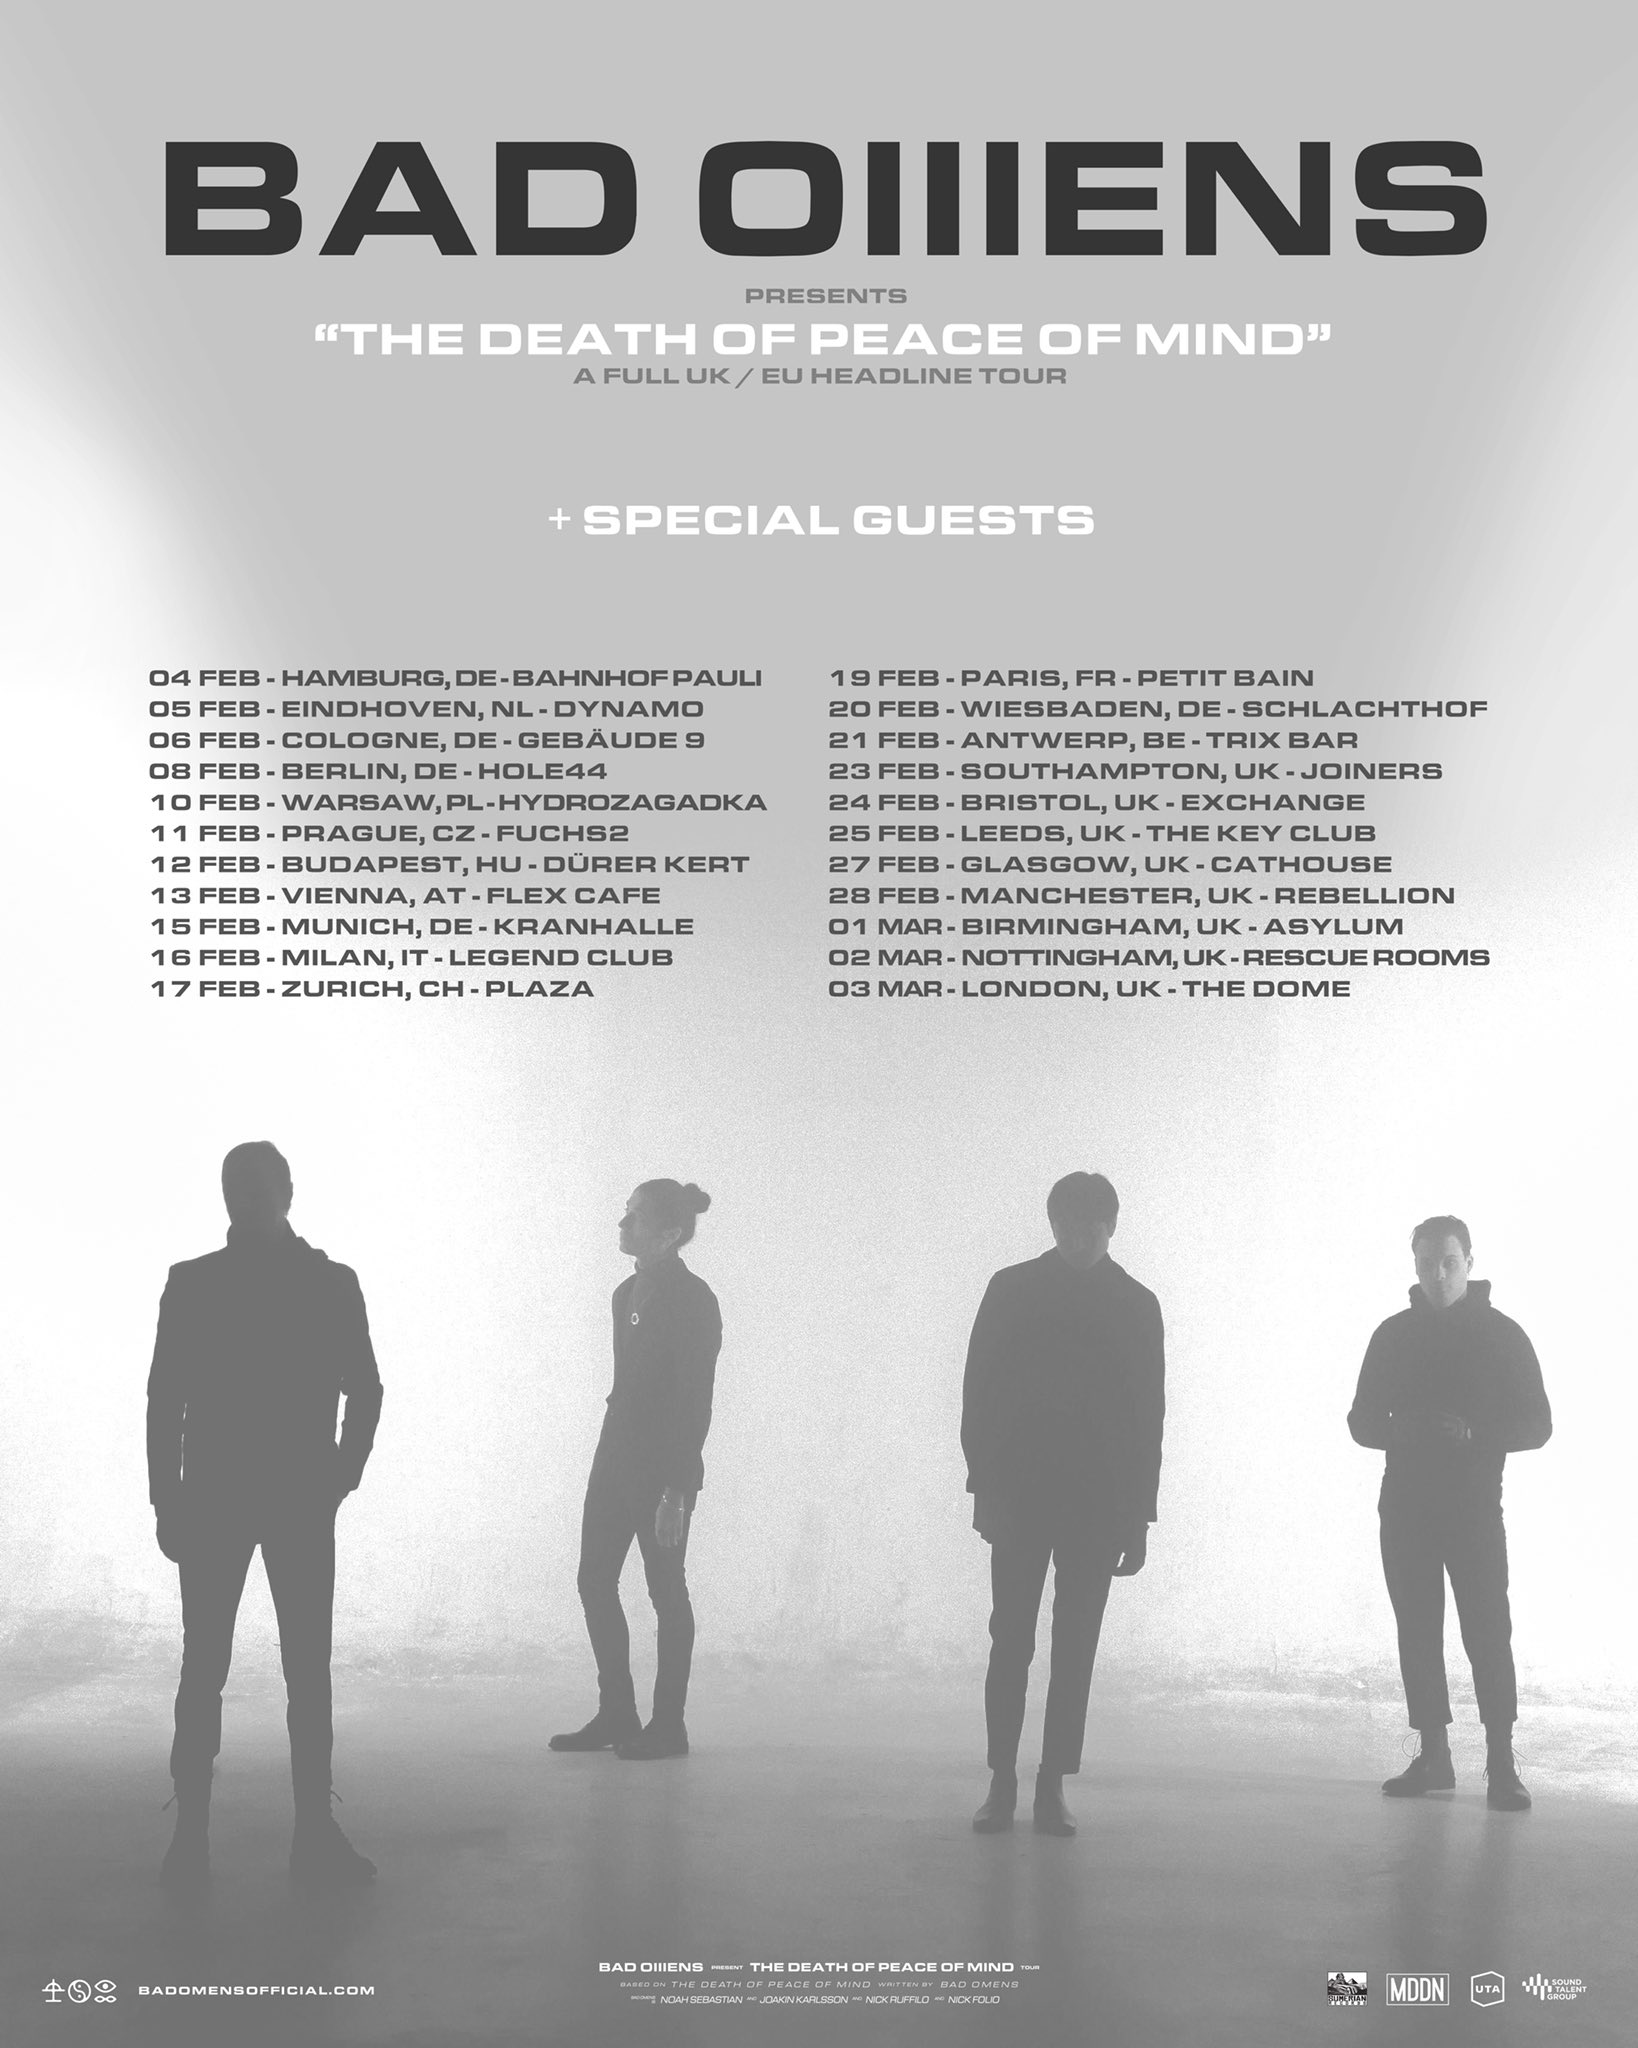 BAD OMENS on Twitter "⁣THE DEATH OF PEACE OF MIND UK/EU TOUR ⁣ Tickets